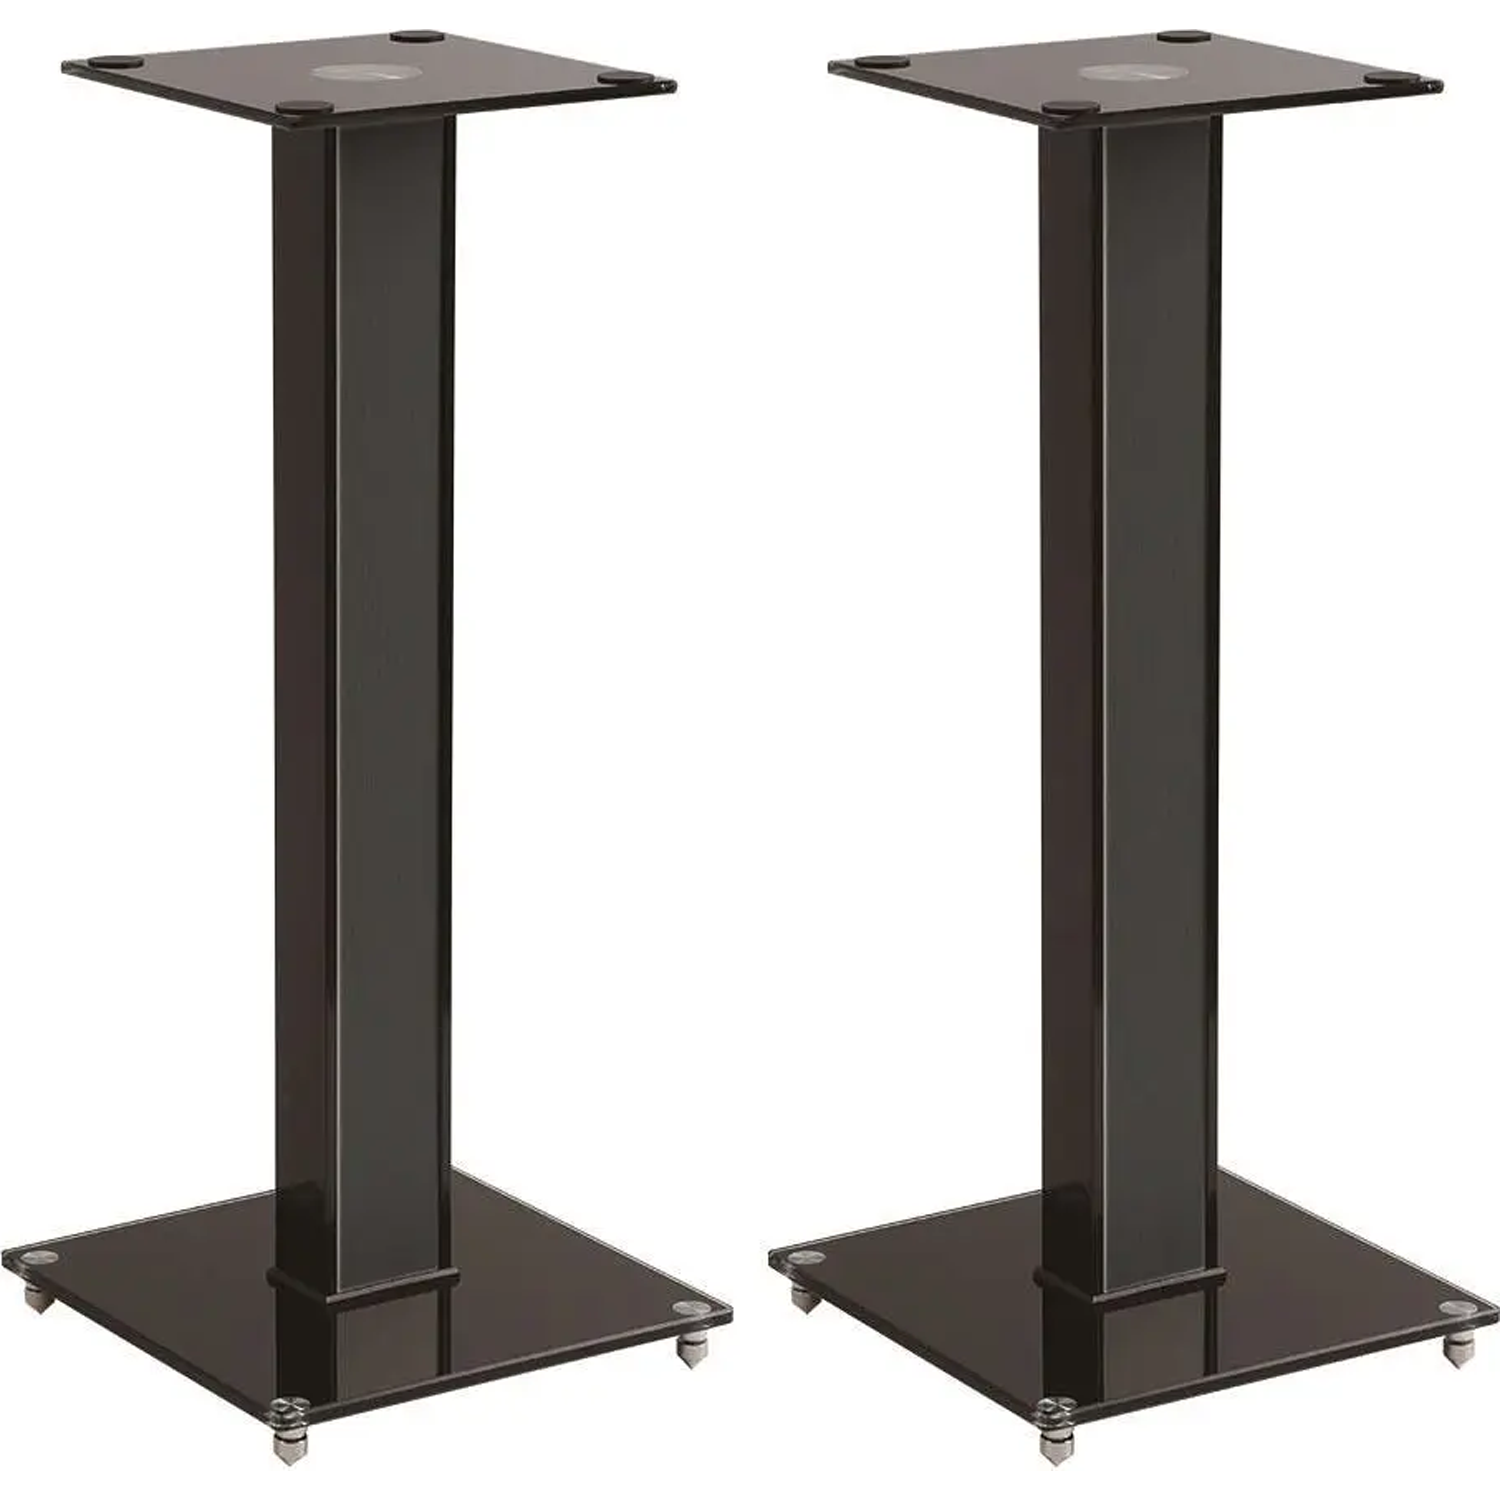 ETHEREAL Elements PAIR 23in Speaker Stands with Cable Management